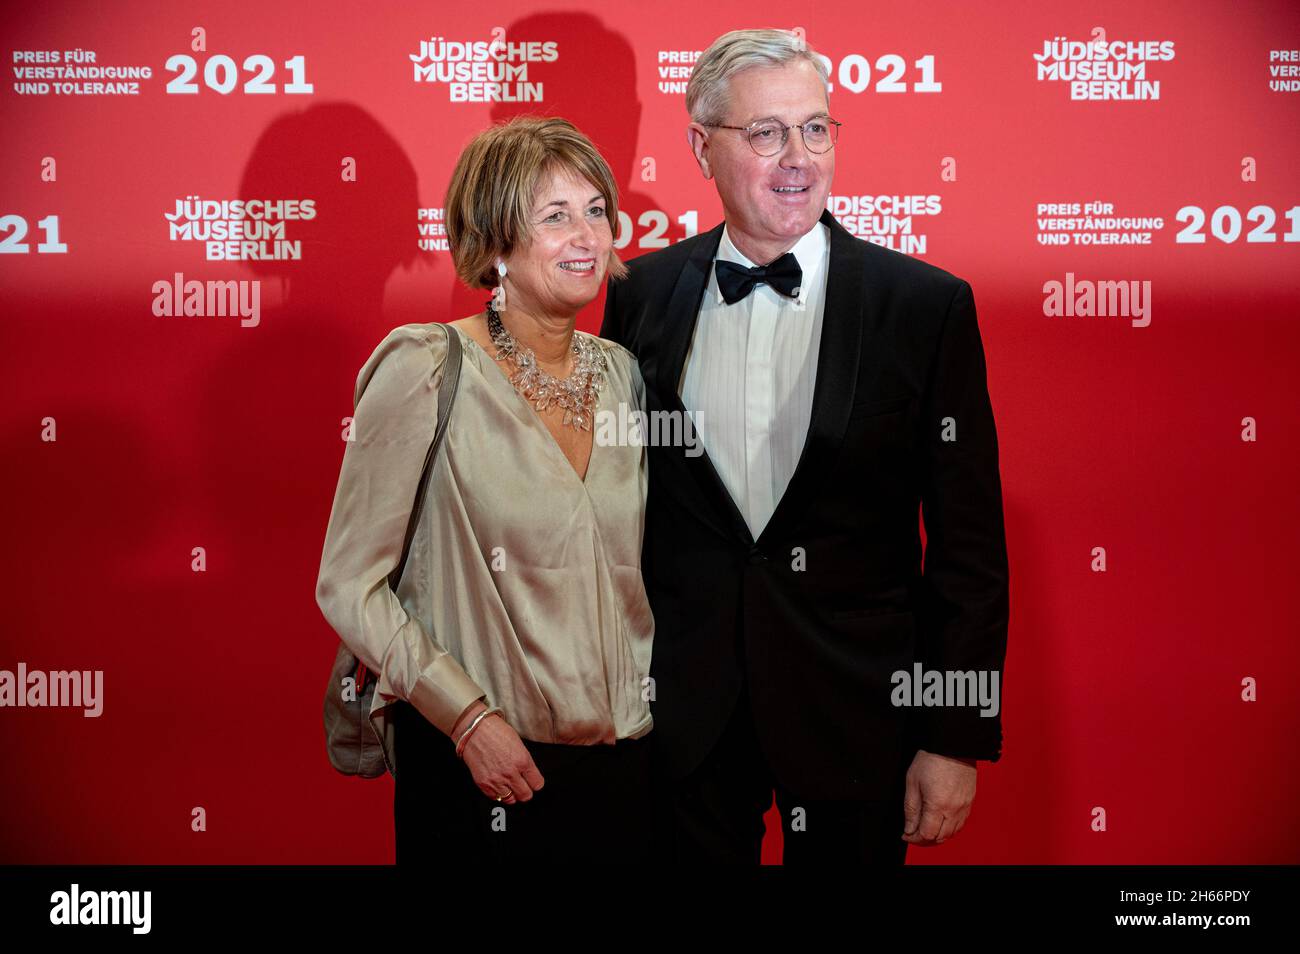 Berlin, Germany. 13th Nov, 2021. Norbert Röttgen (CDU) and his wife Ebba Herfs-Röttgen stand by the press wall at the award ceremony for the "Prize for Understanding and Tolerance". The prize goes to the President of the Jewish Community of Munich and Upper Bavaria Knobloch and the architect Libeskind. Credit: Fabian Sommer/dpa/Alamy Live News Stock Photo